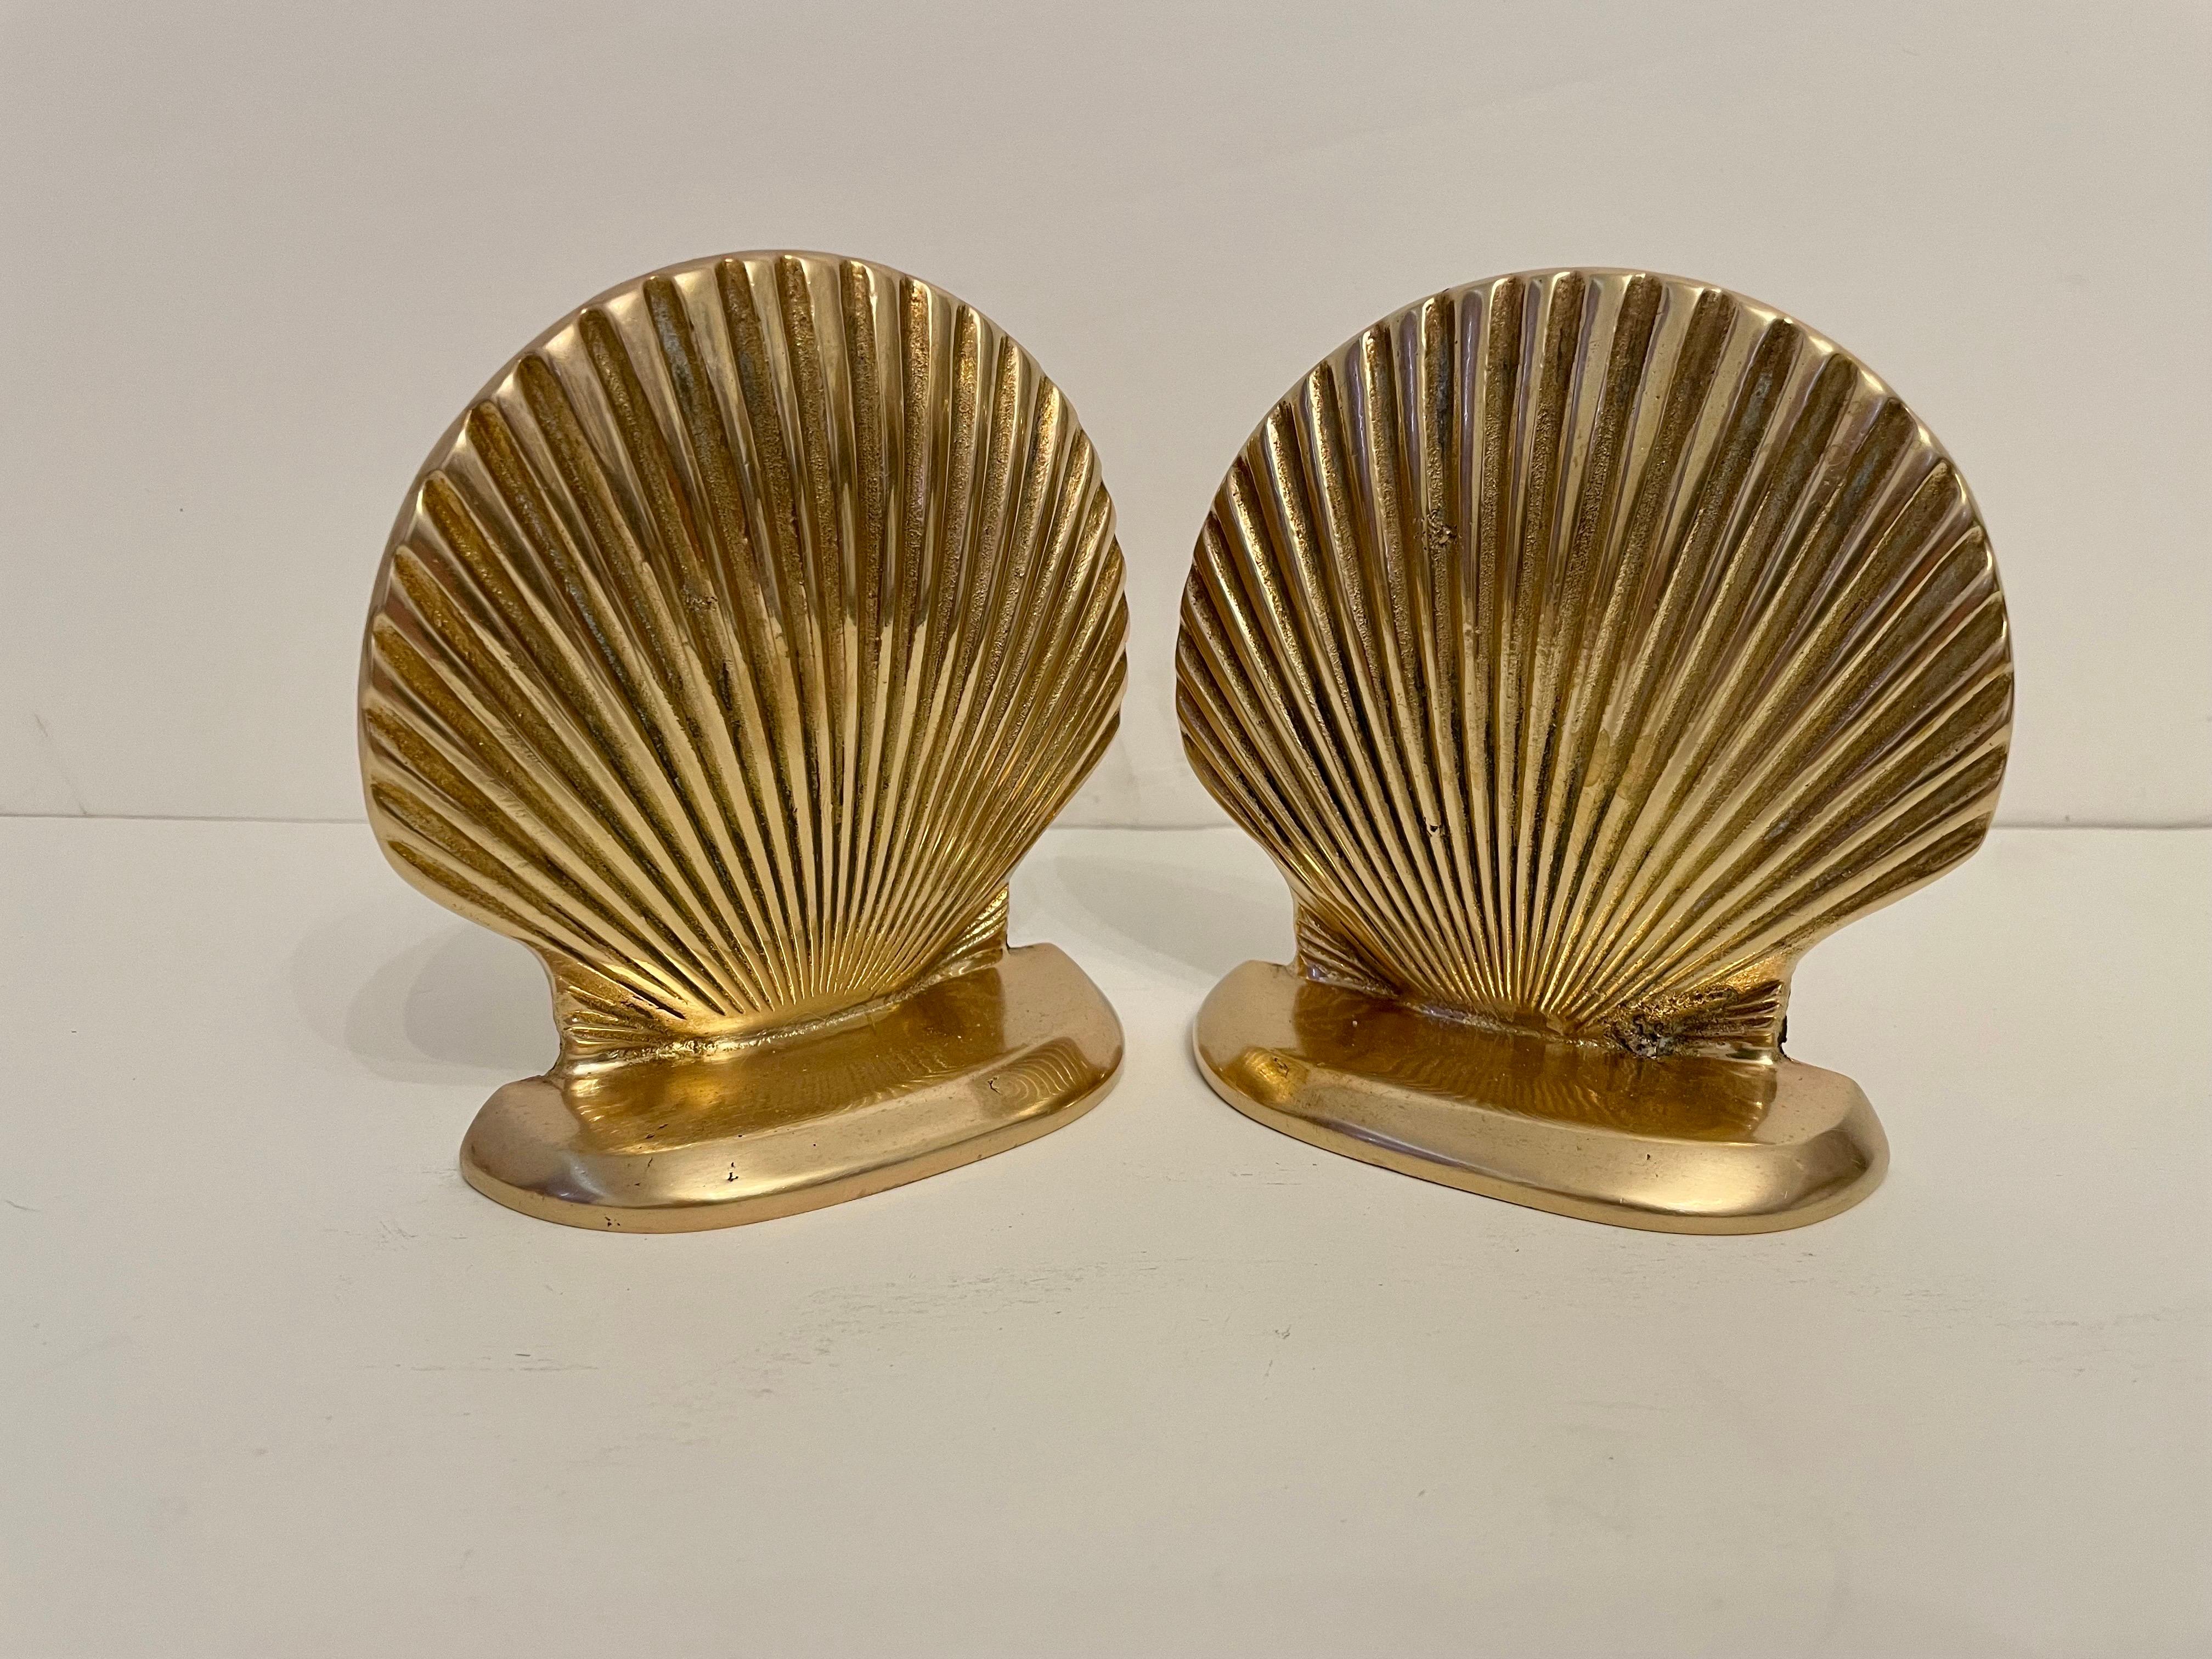 Vintage clam shell seashell bookends. Good condition. Has nice size to hold a stack of books. Great for your beach house! Any dark areas are reflection only. Same day shipping!